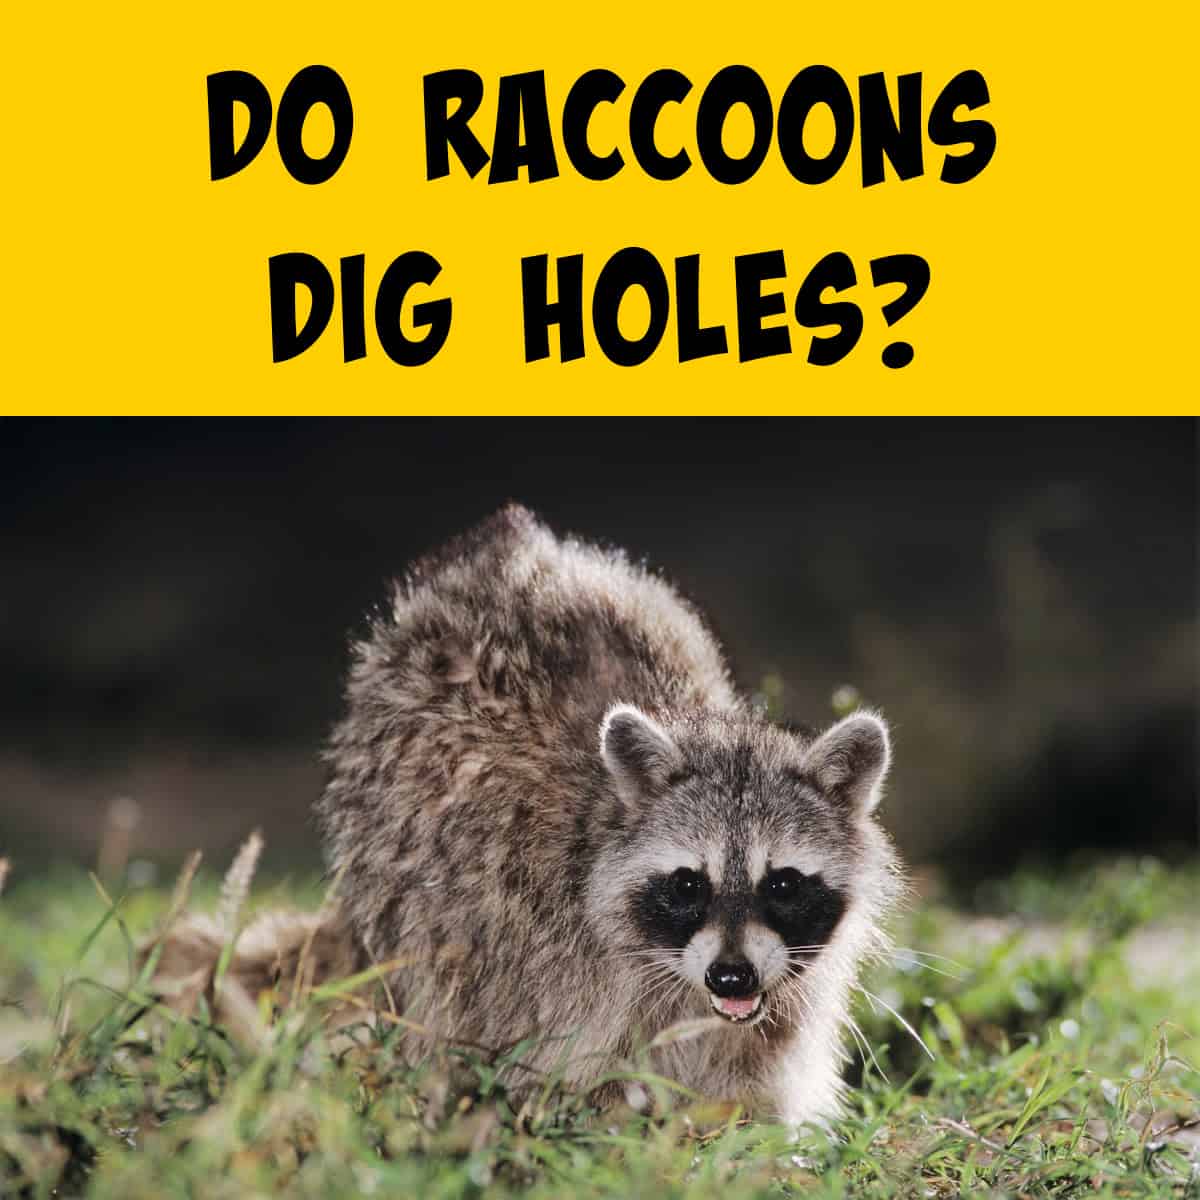 Raccoon Digging a Whole